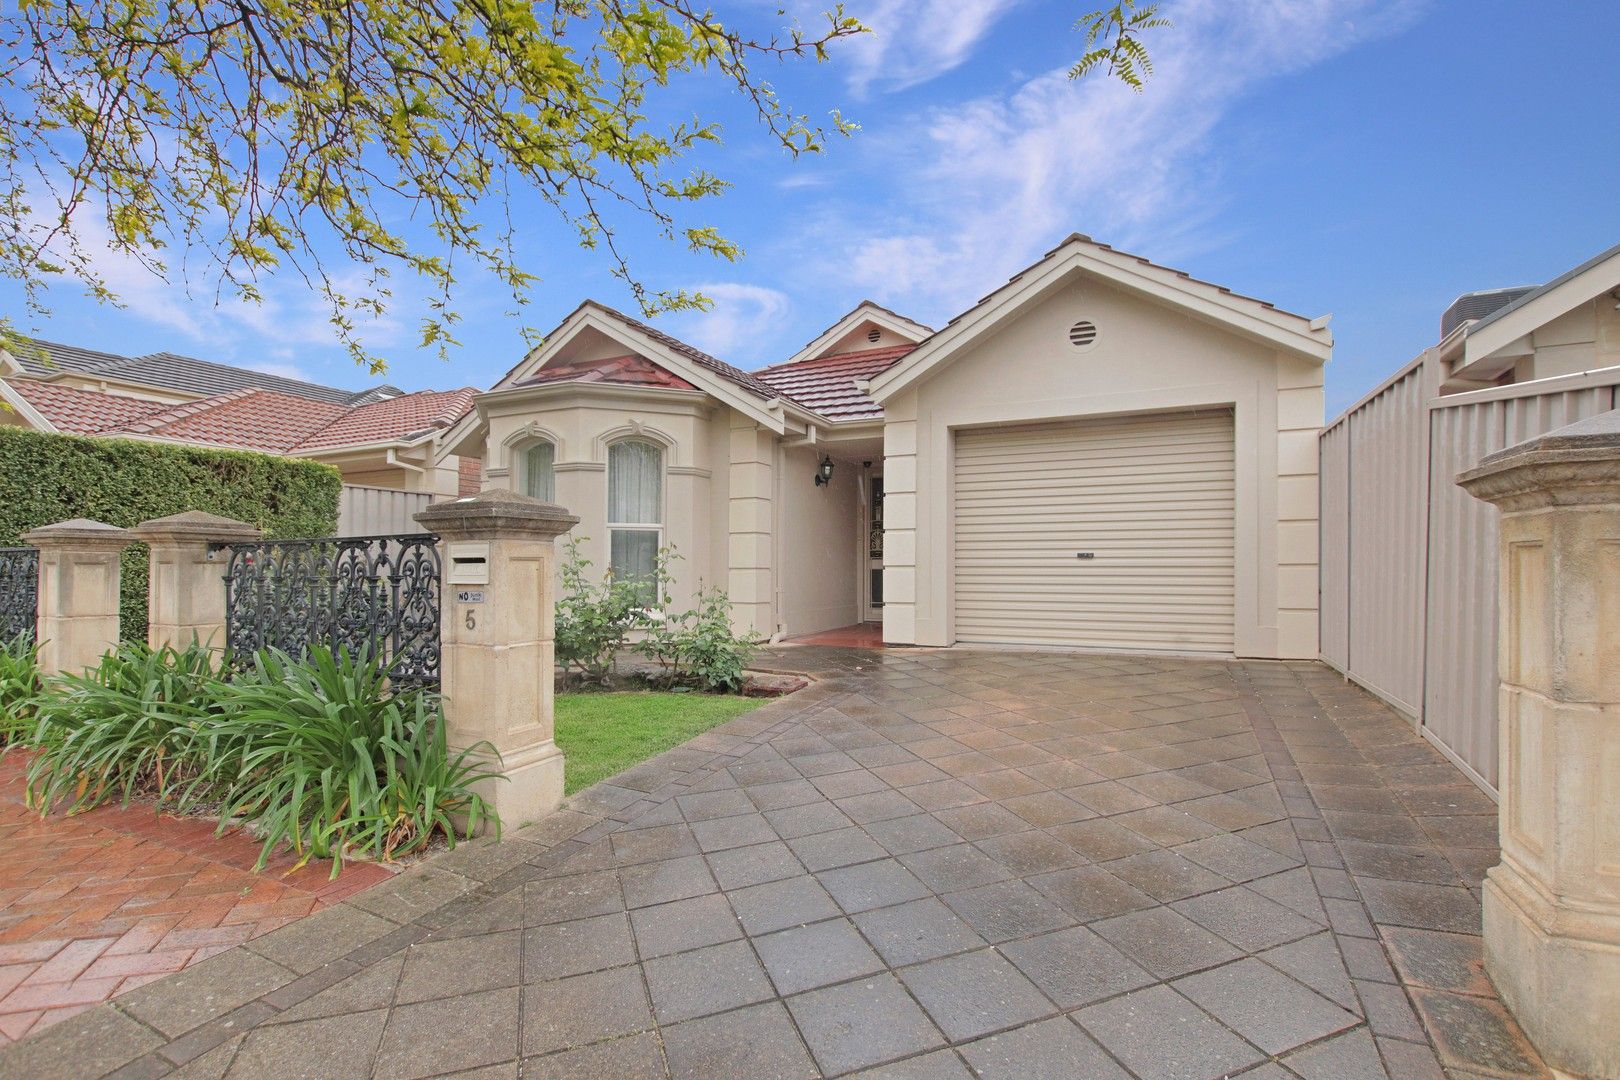 3 bedrooms House in 5 Rawson Drive ALLENBY GARDENS SA, 5009